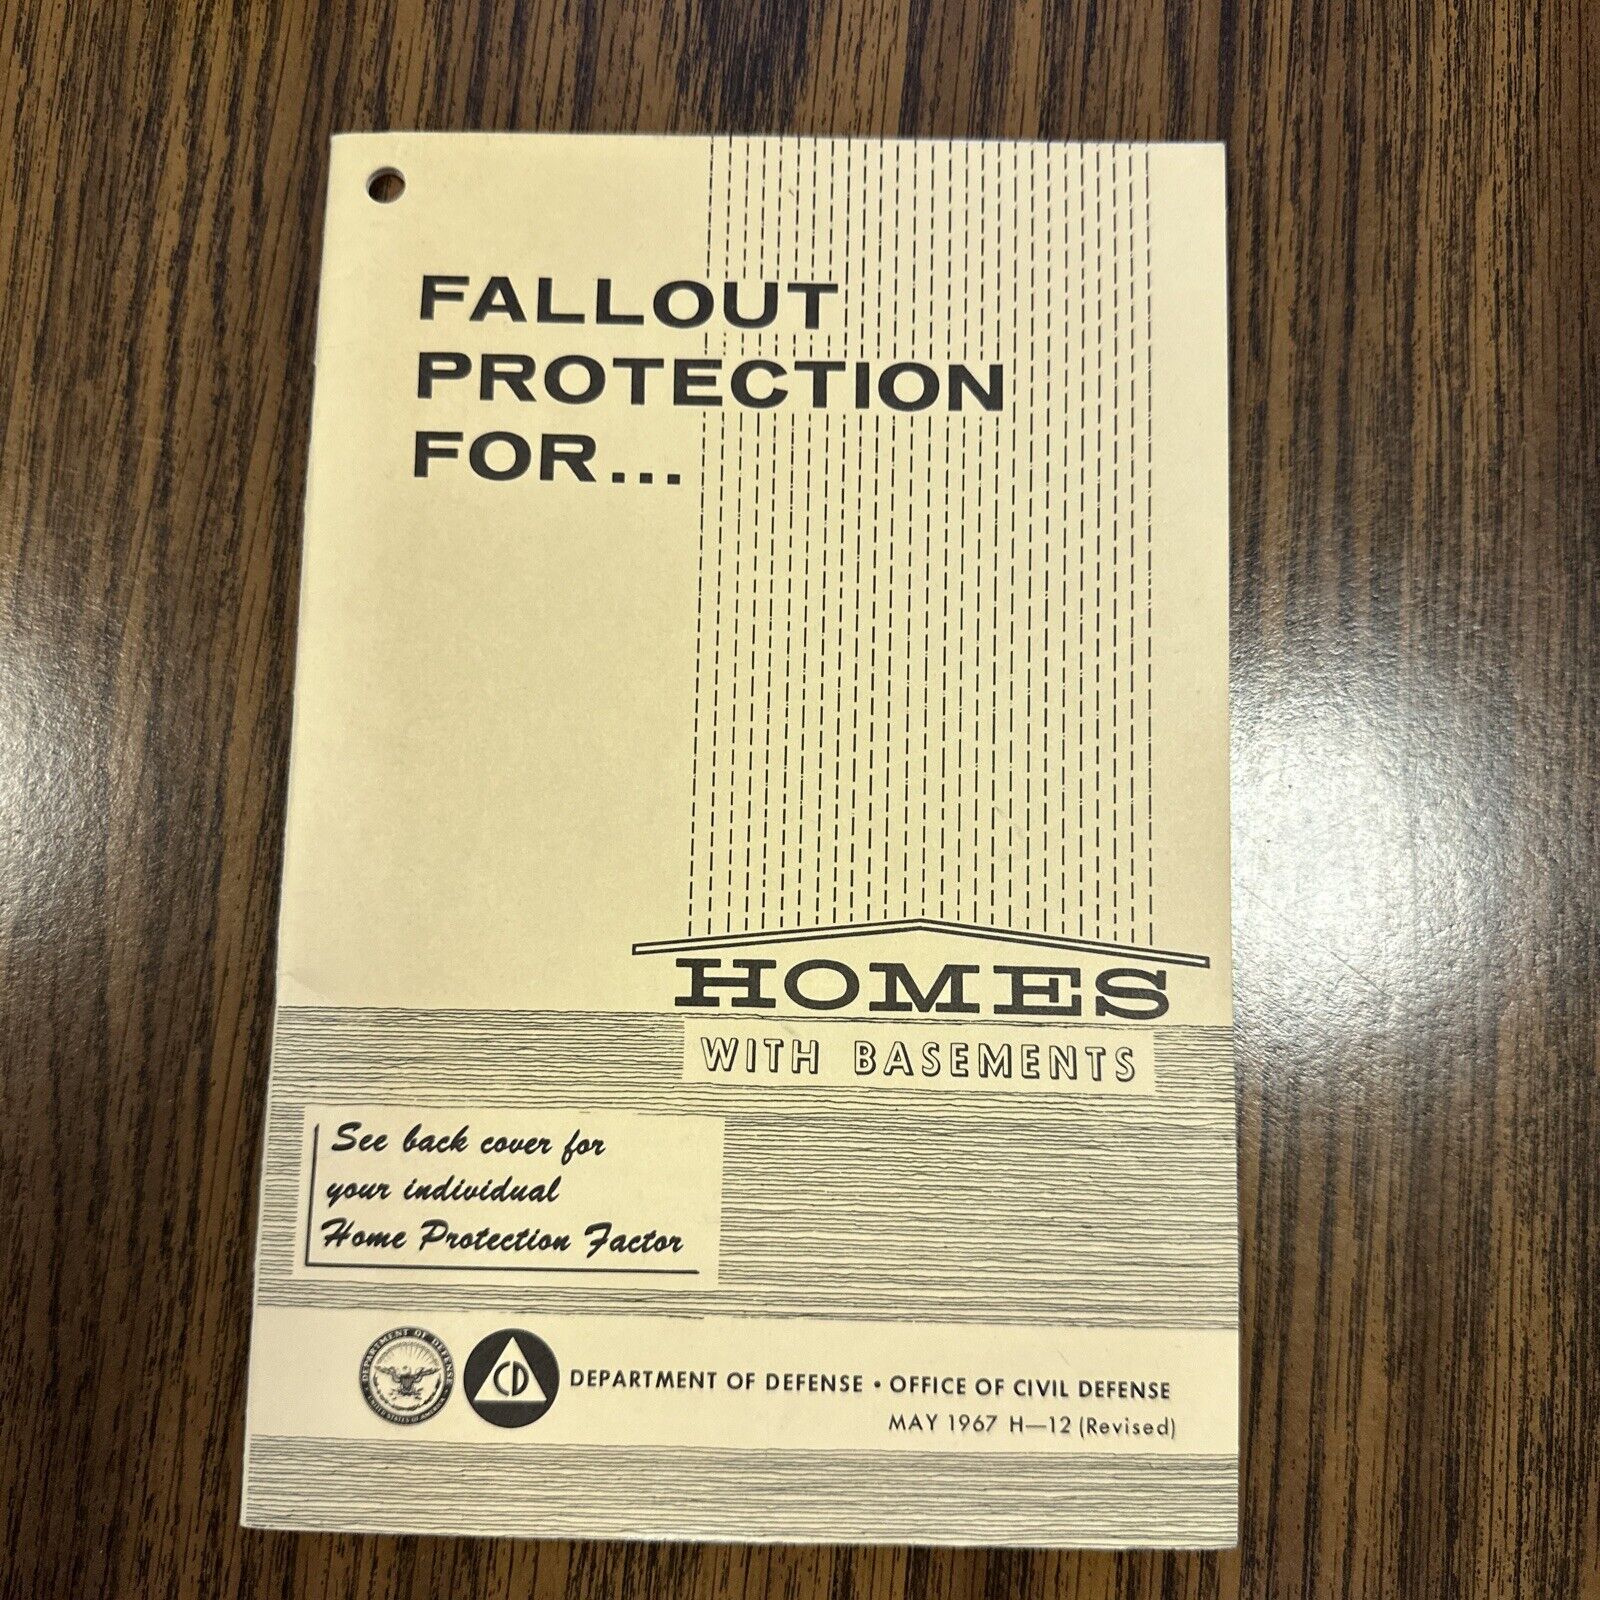 1960s Fallout Protection For Homes with Basements 1967, by Dept of Defense